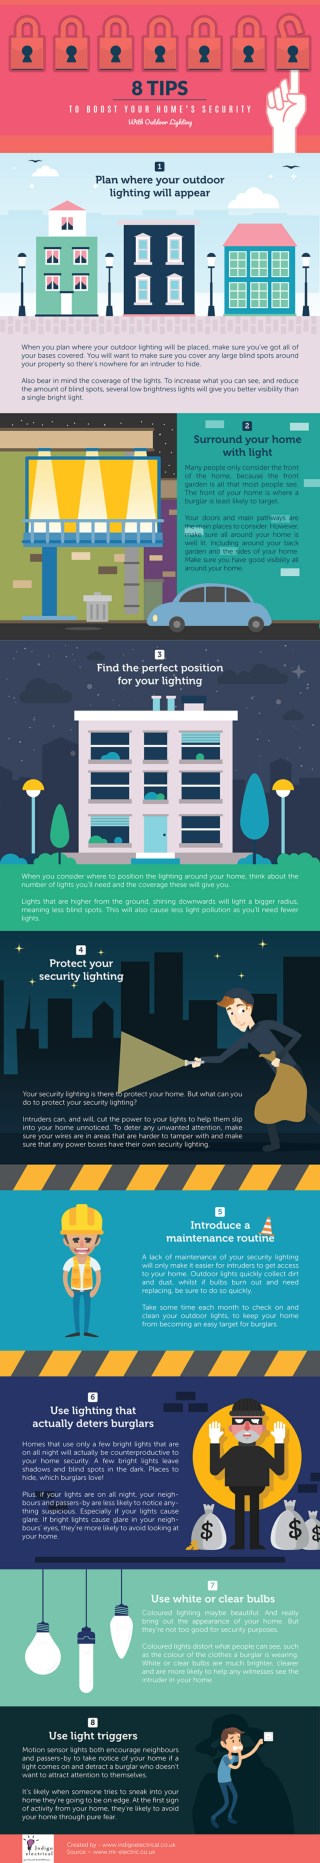 8 Tips to Boost Your Home’s Security With Outdoor Lighting